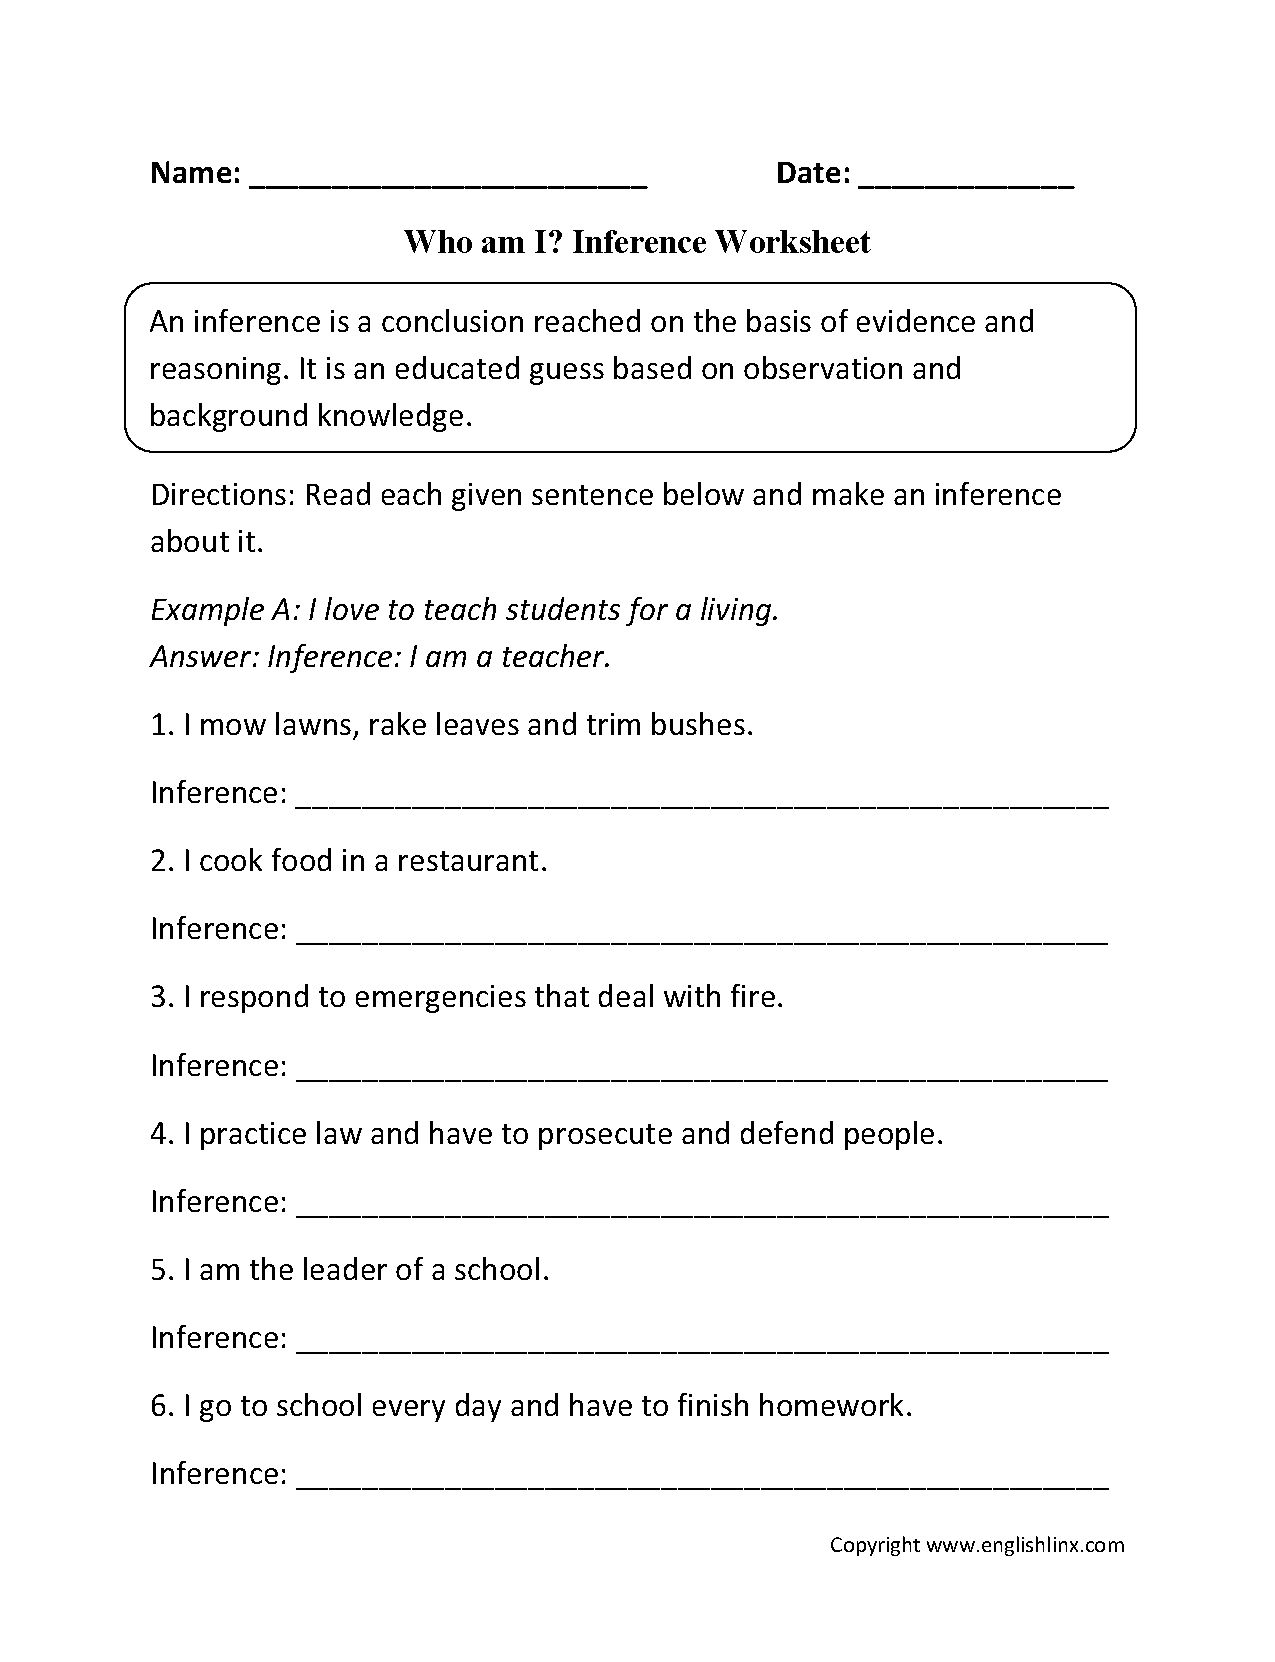 inference-worksheet-5th-grade-imatei